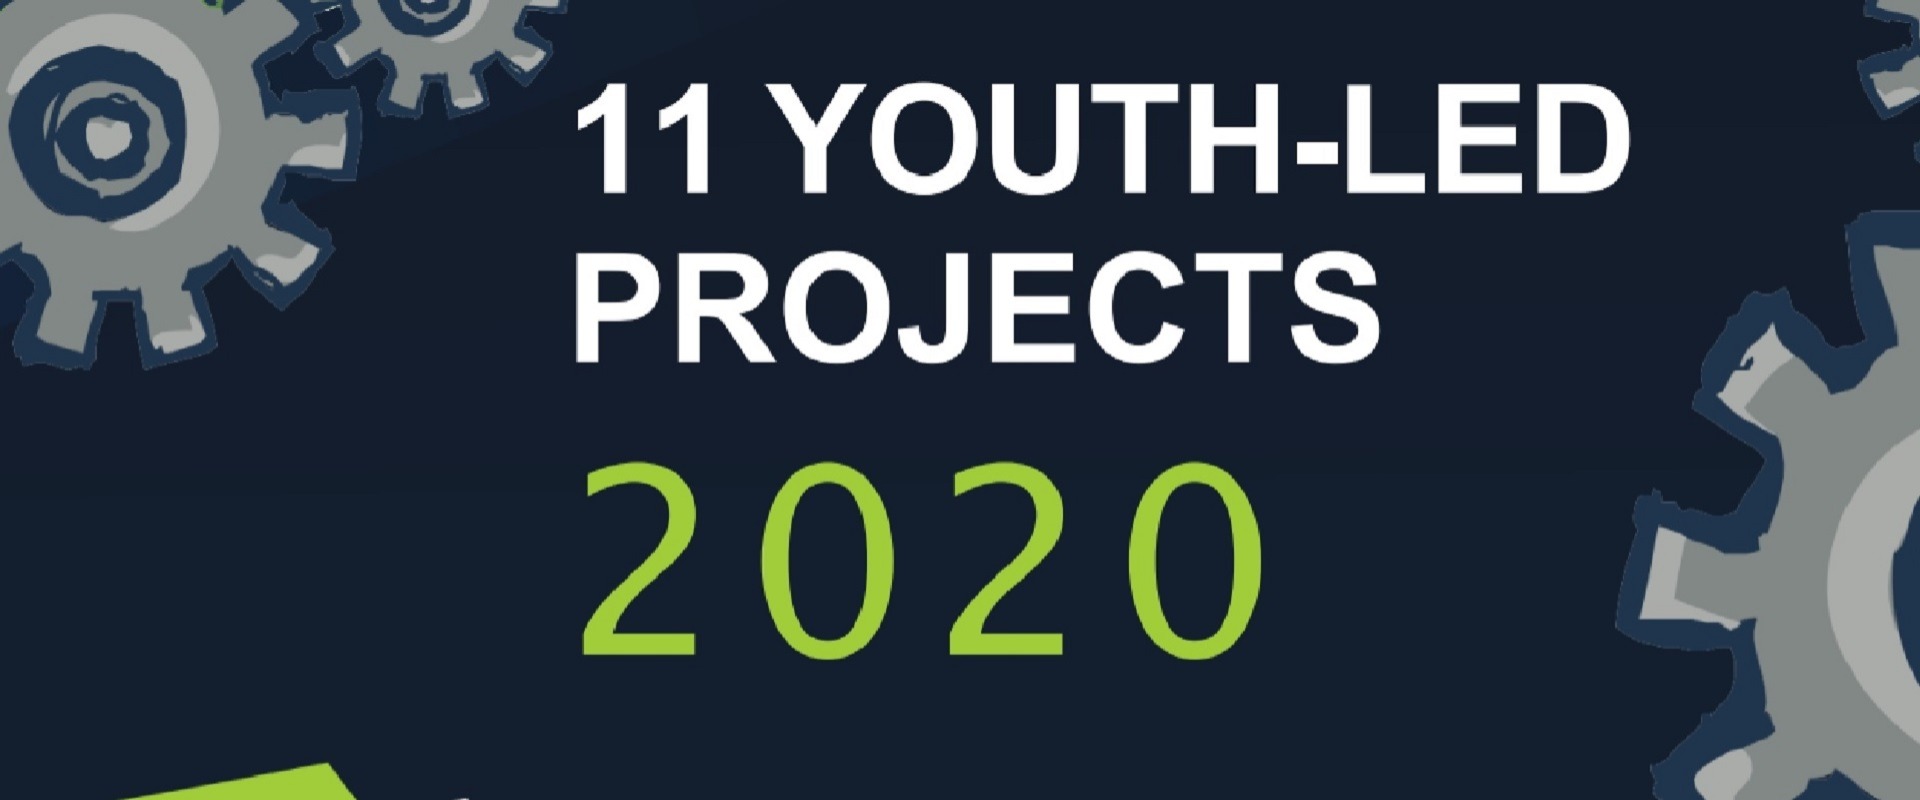 NLE 11 Youth Led Projects 2020